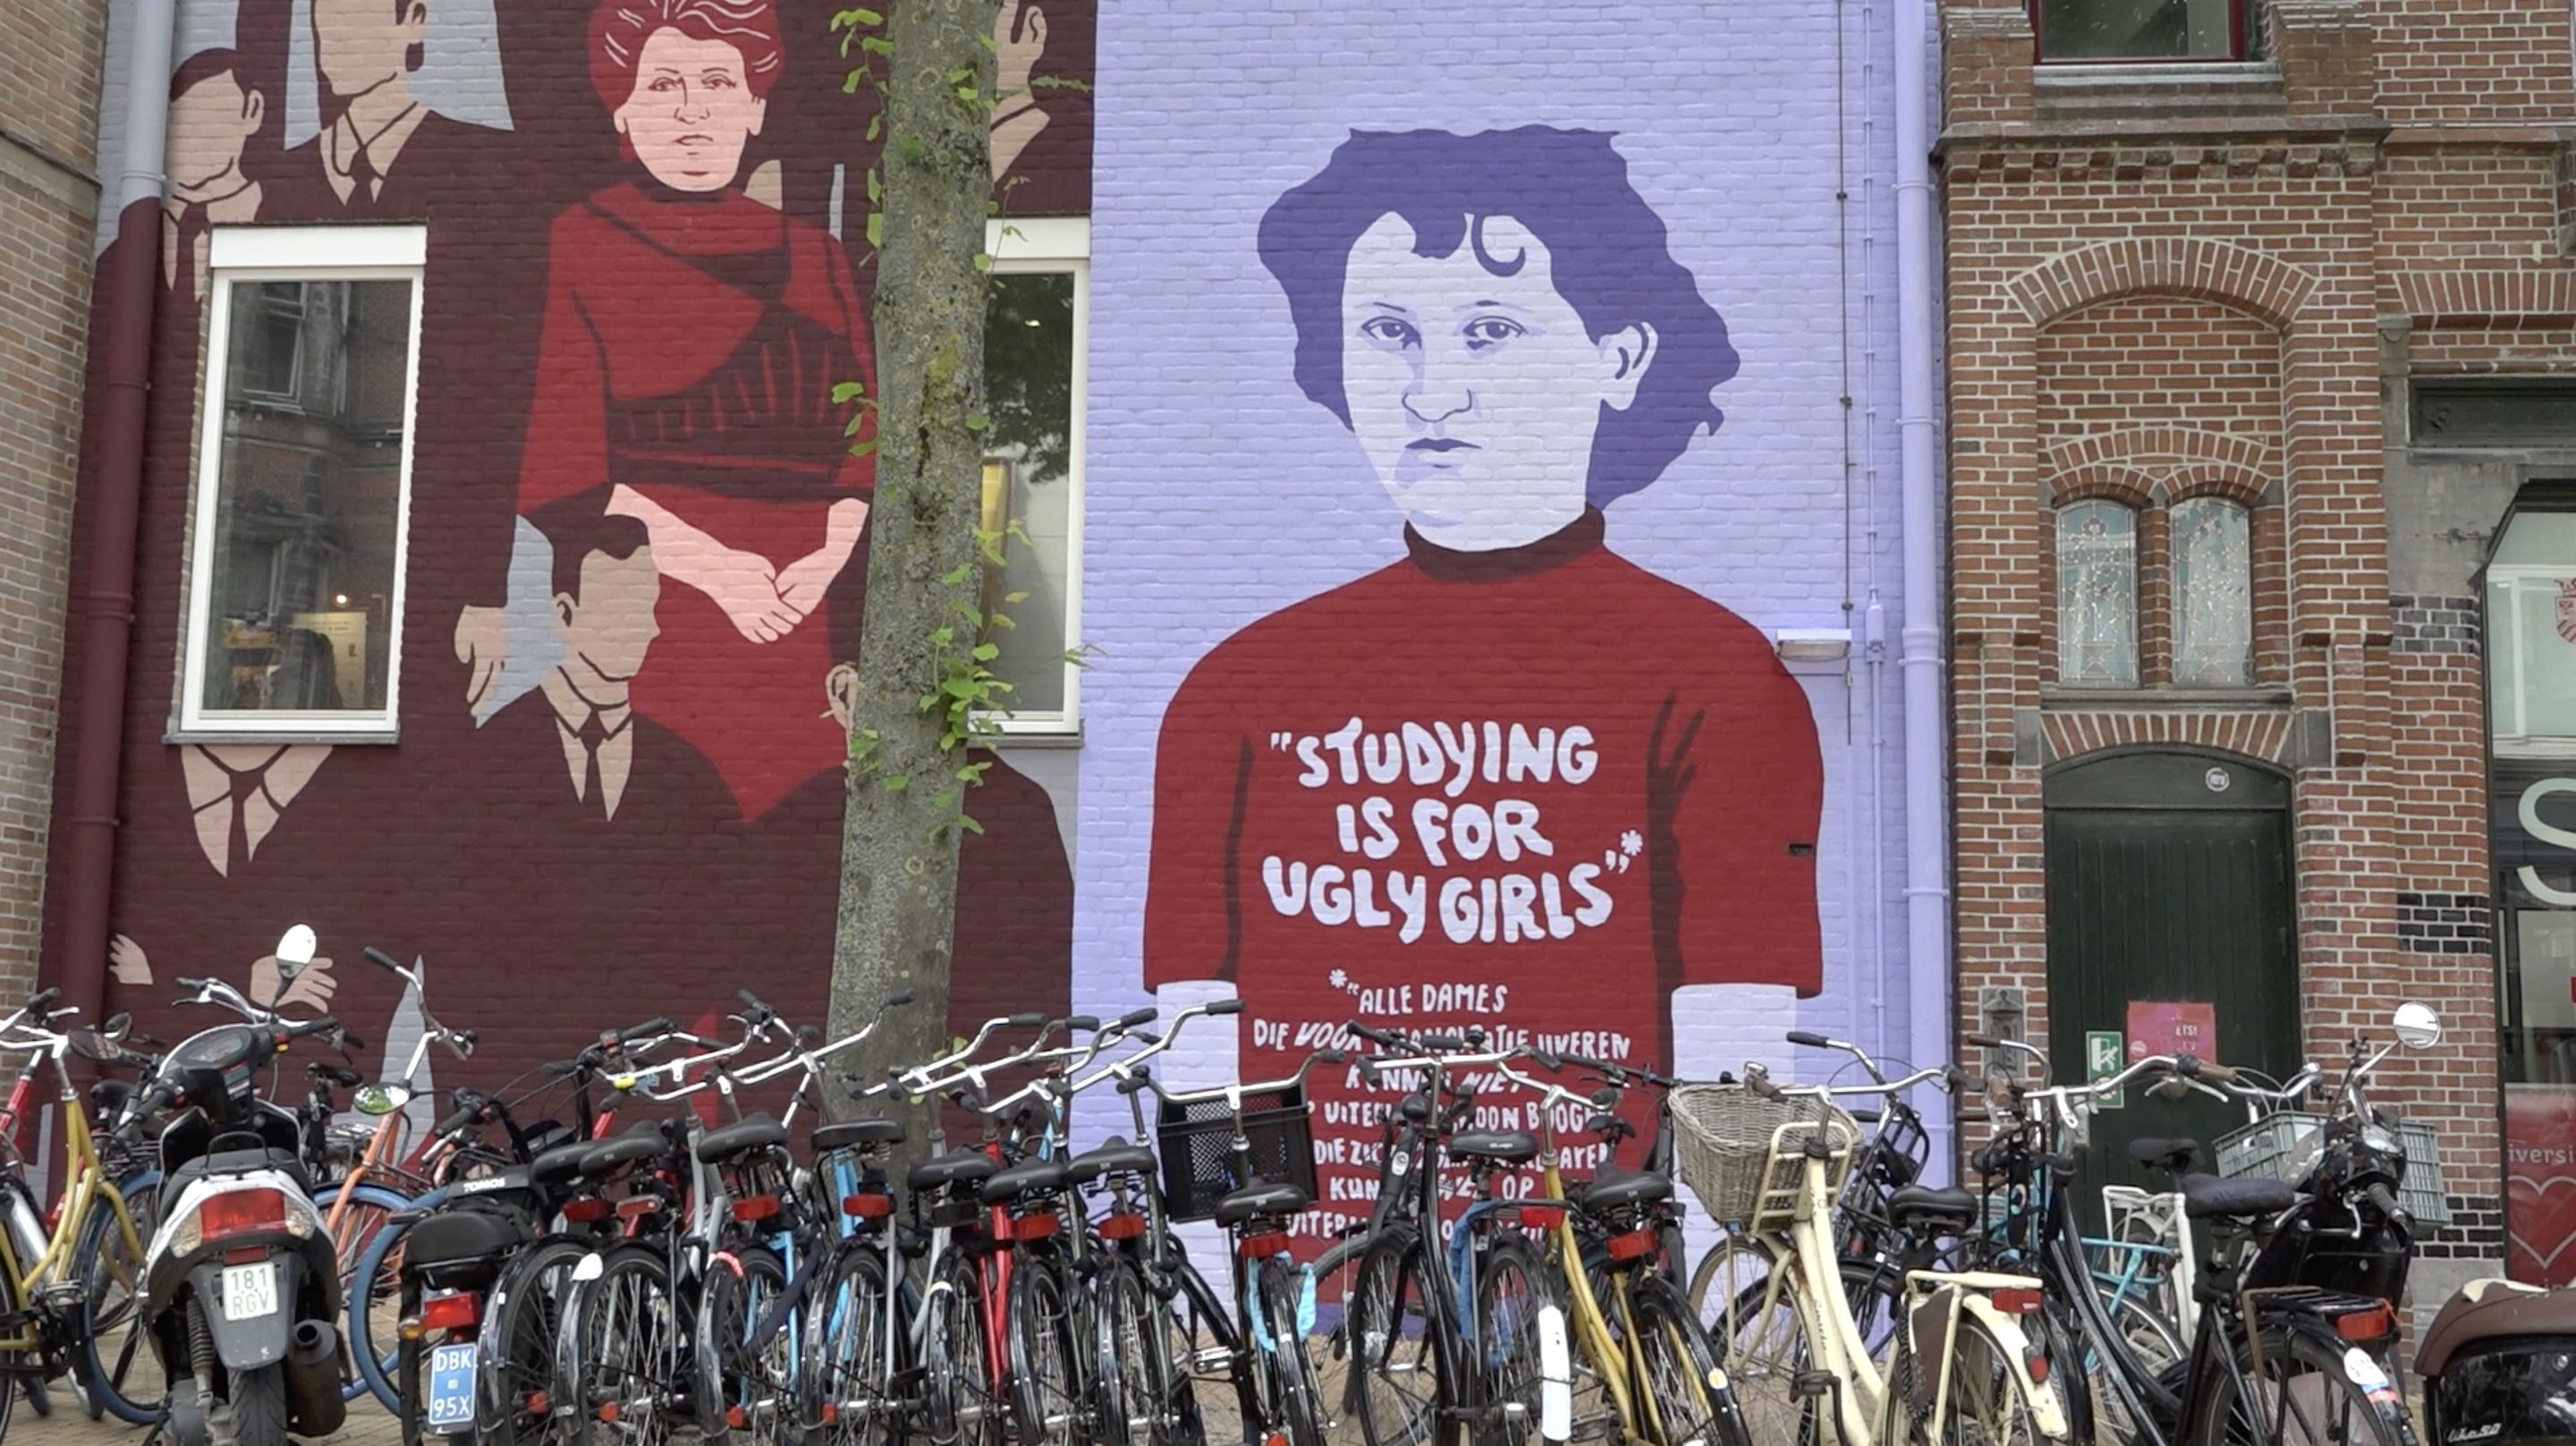 “Studying is for ugly girls” – when art gets misunderstood. – VIDEO